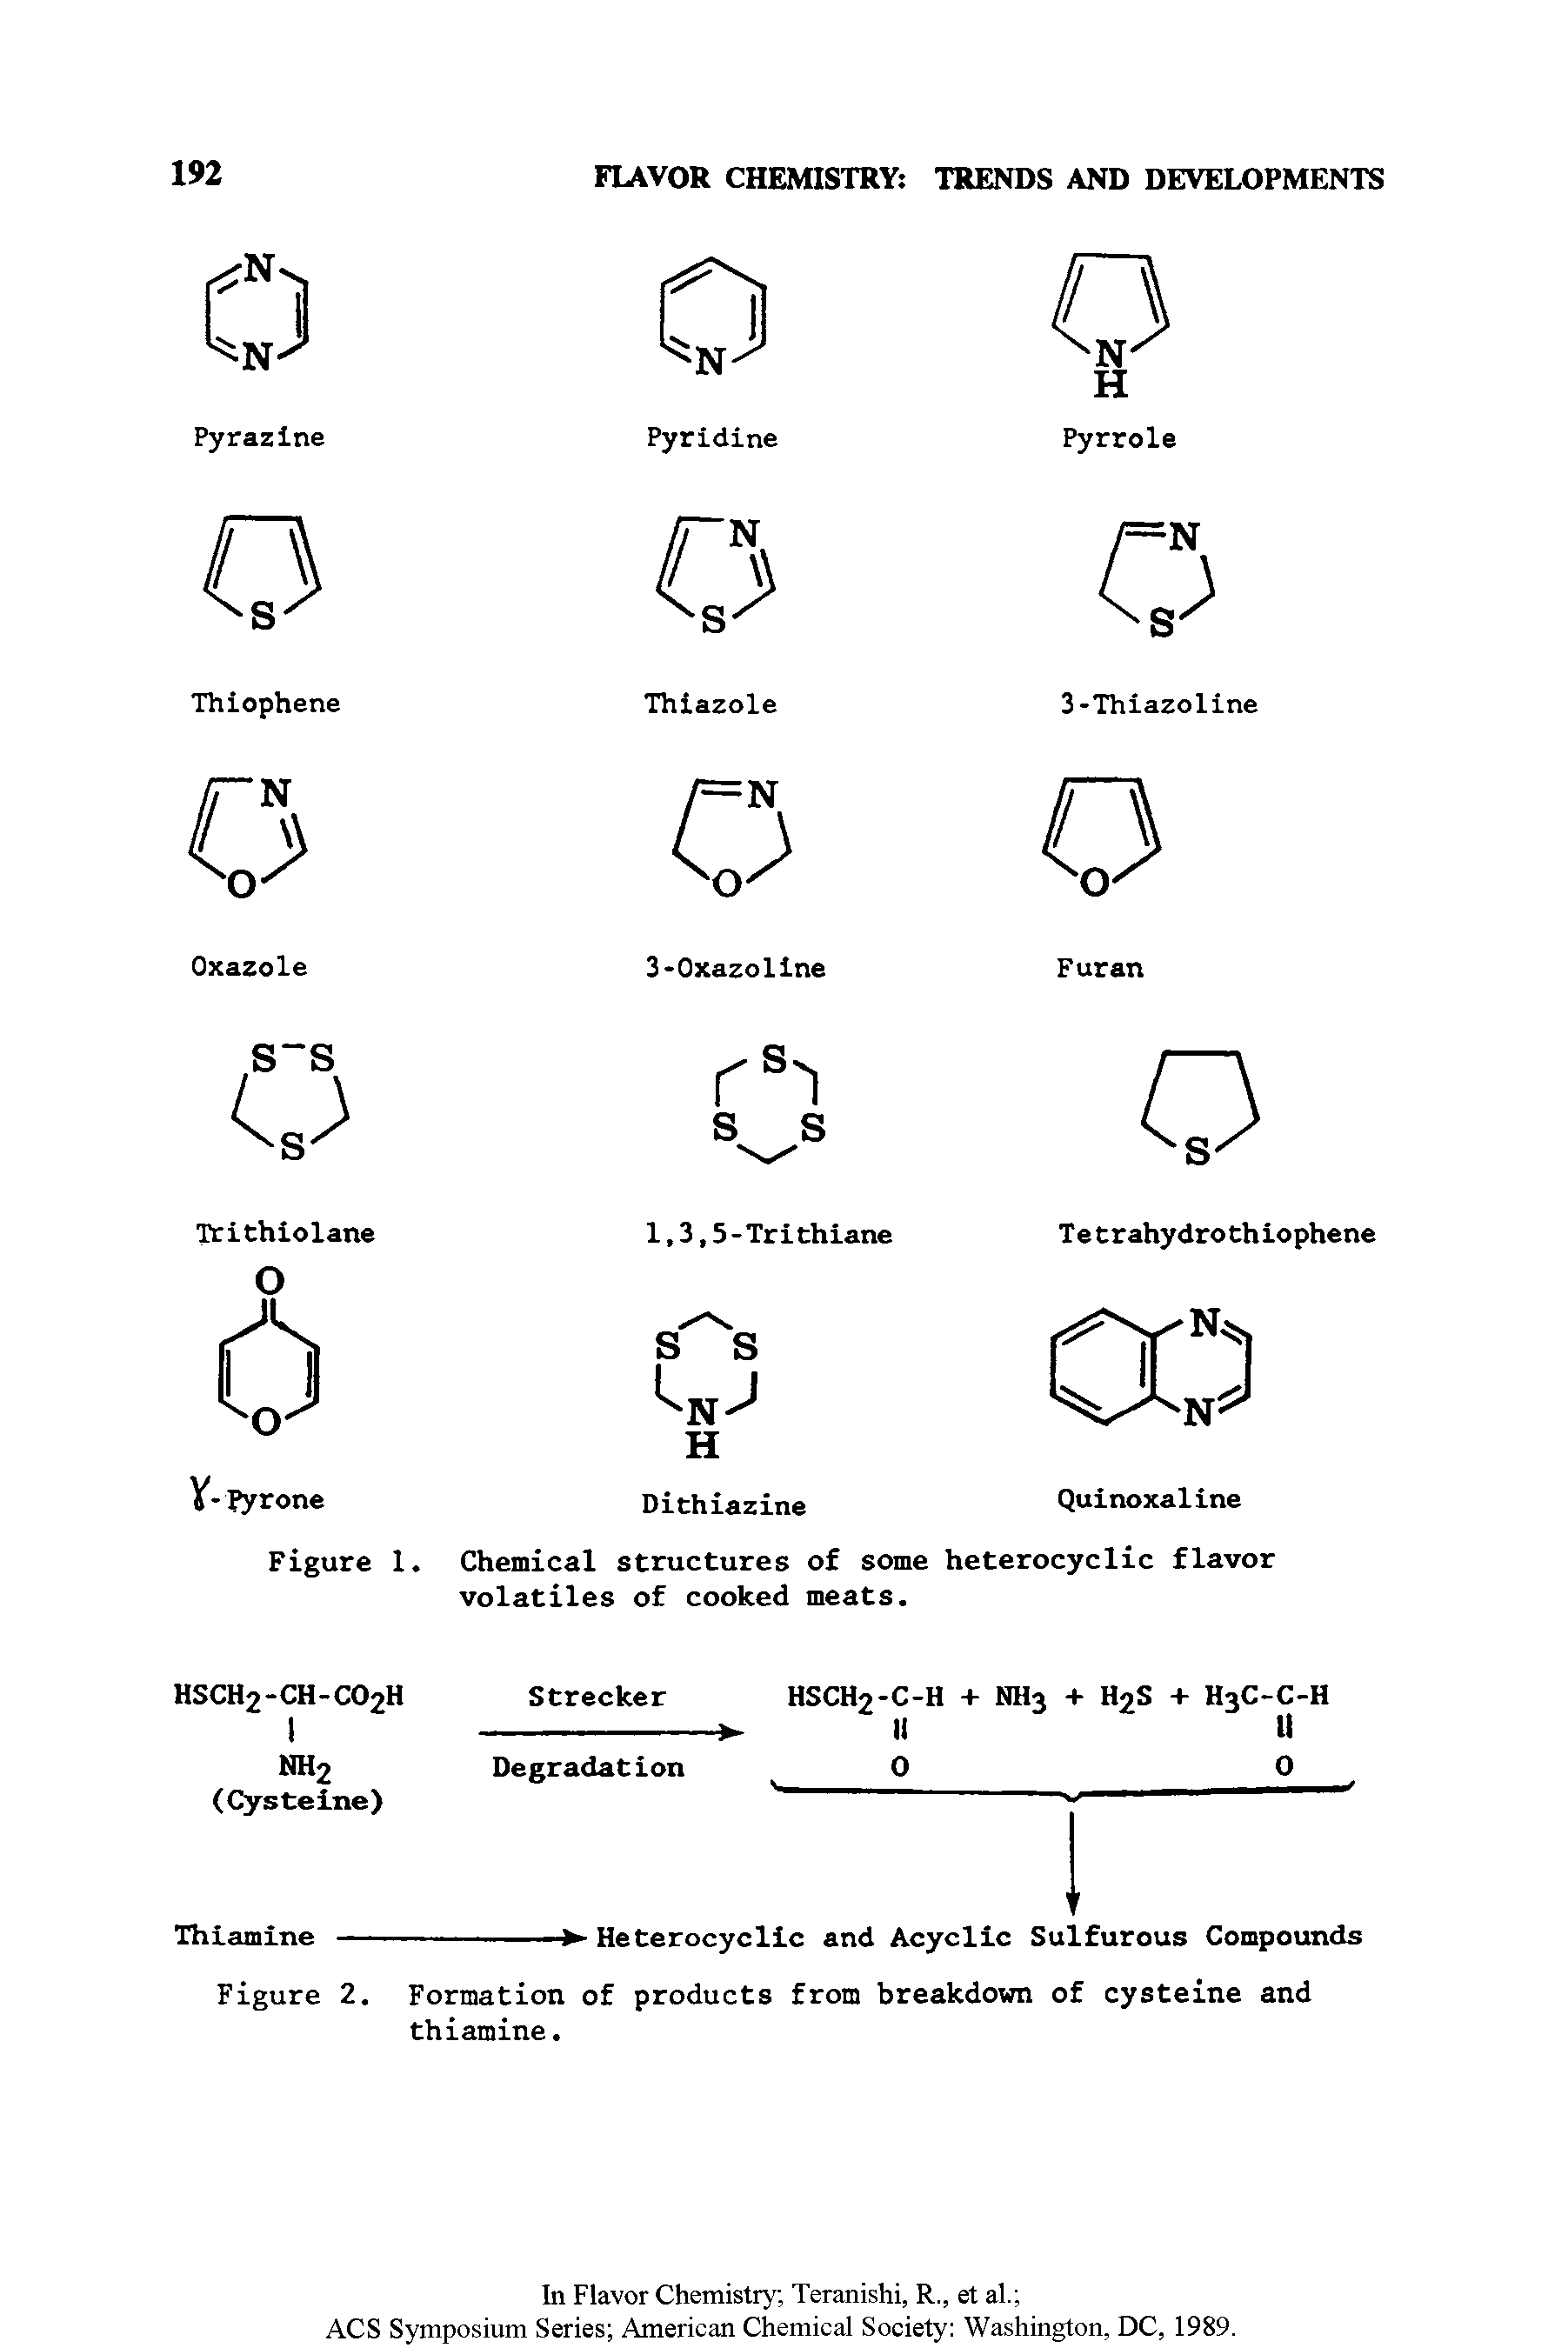 Figure 2. Formation of products from breakdown of cysteine and thiamine.